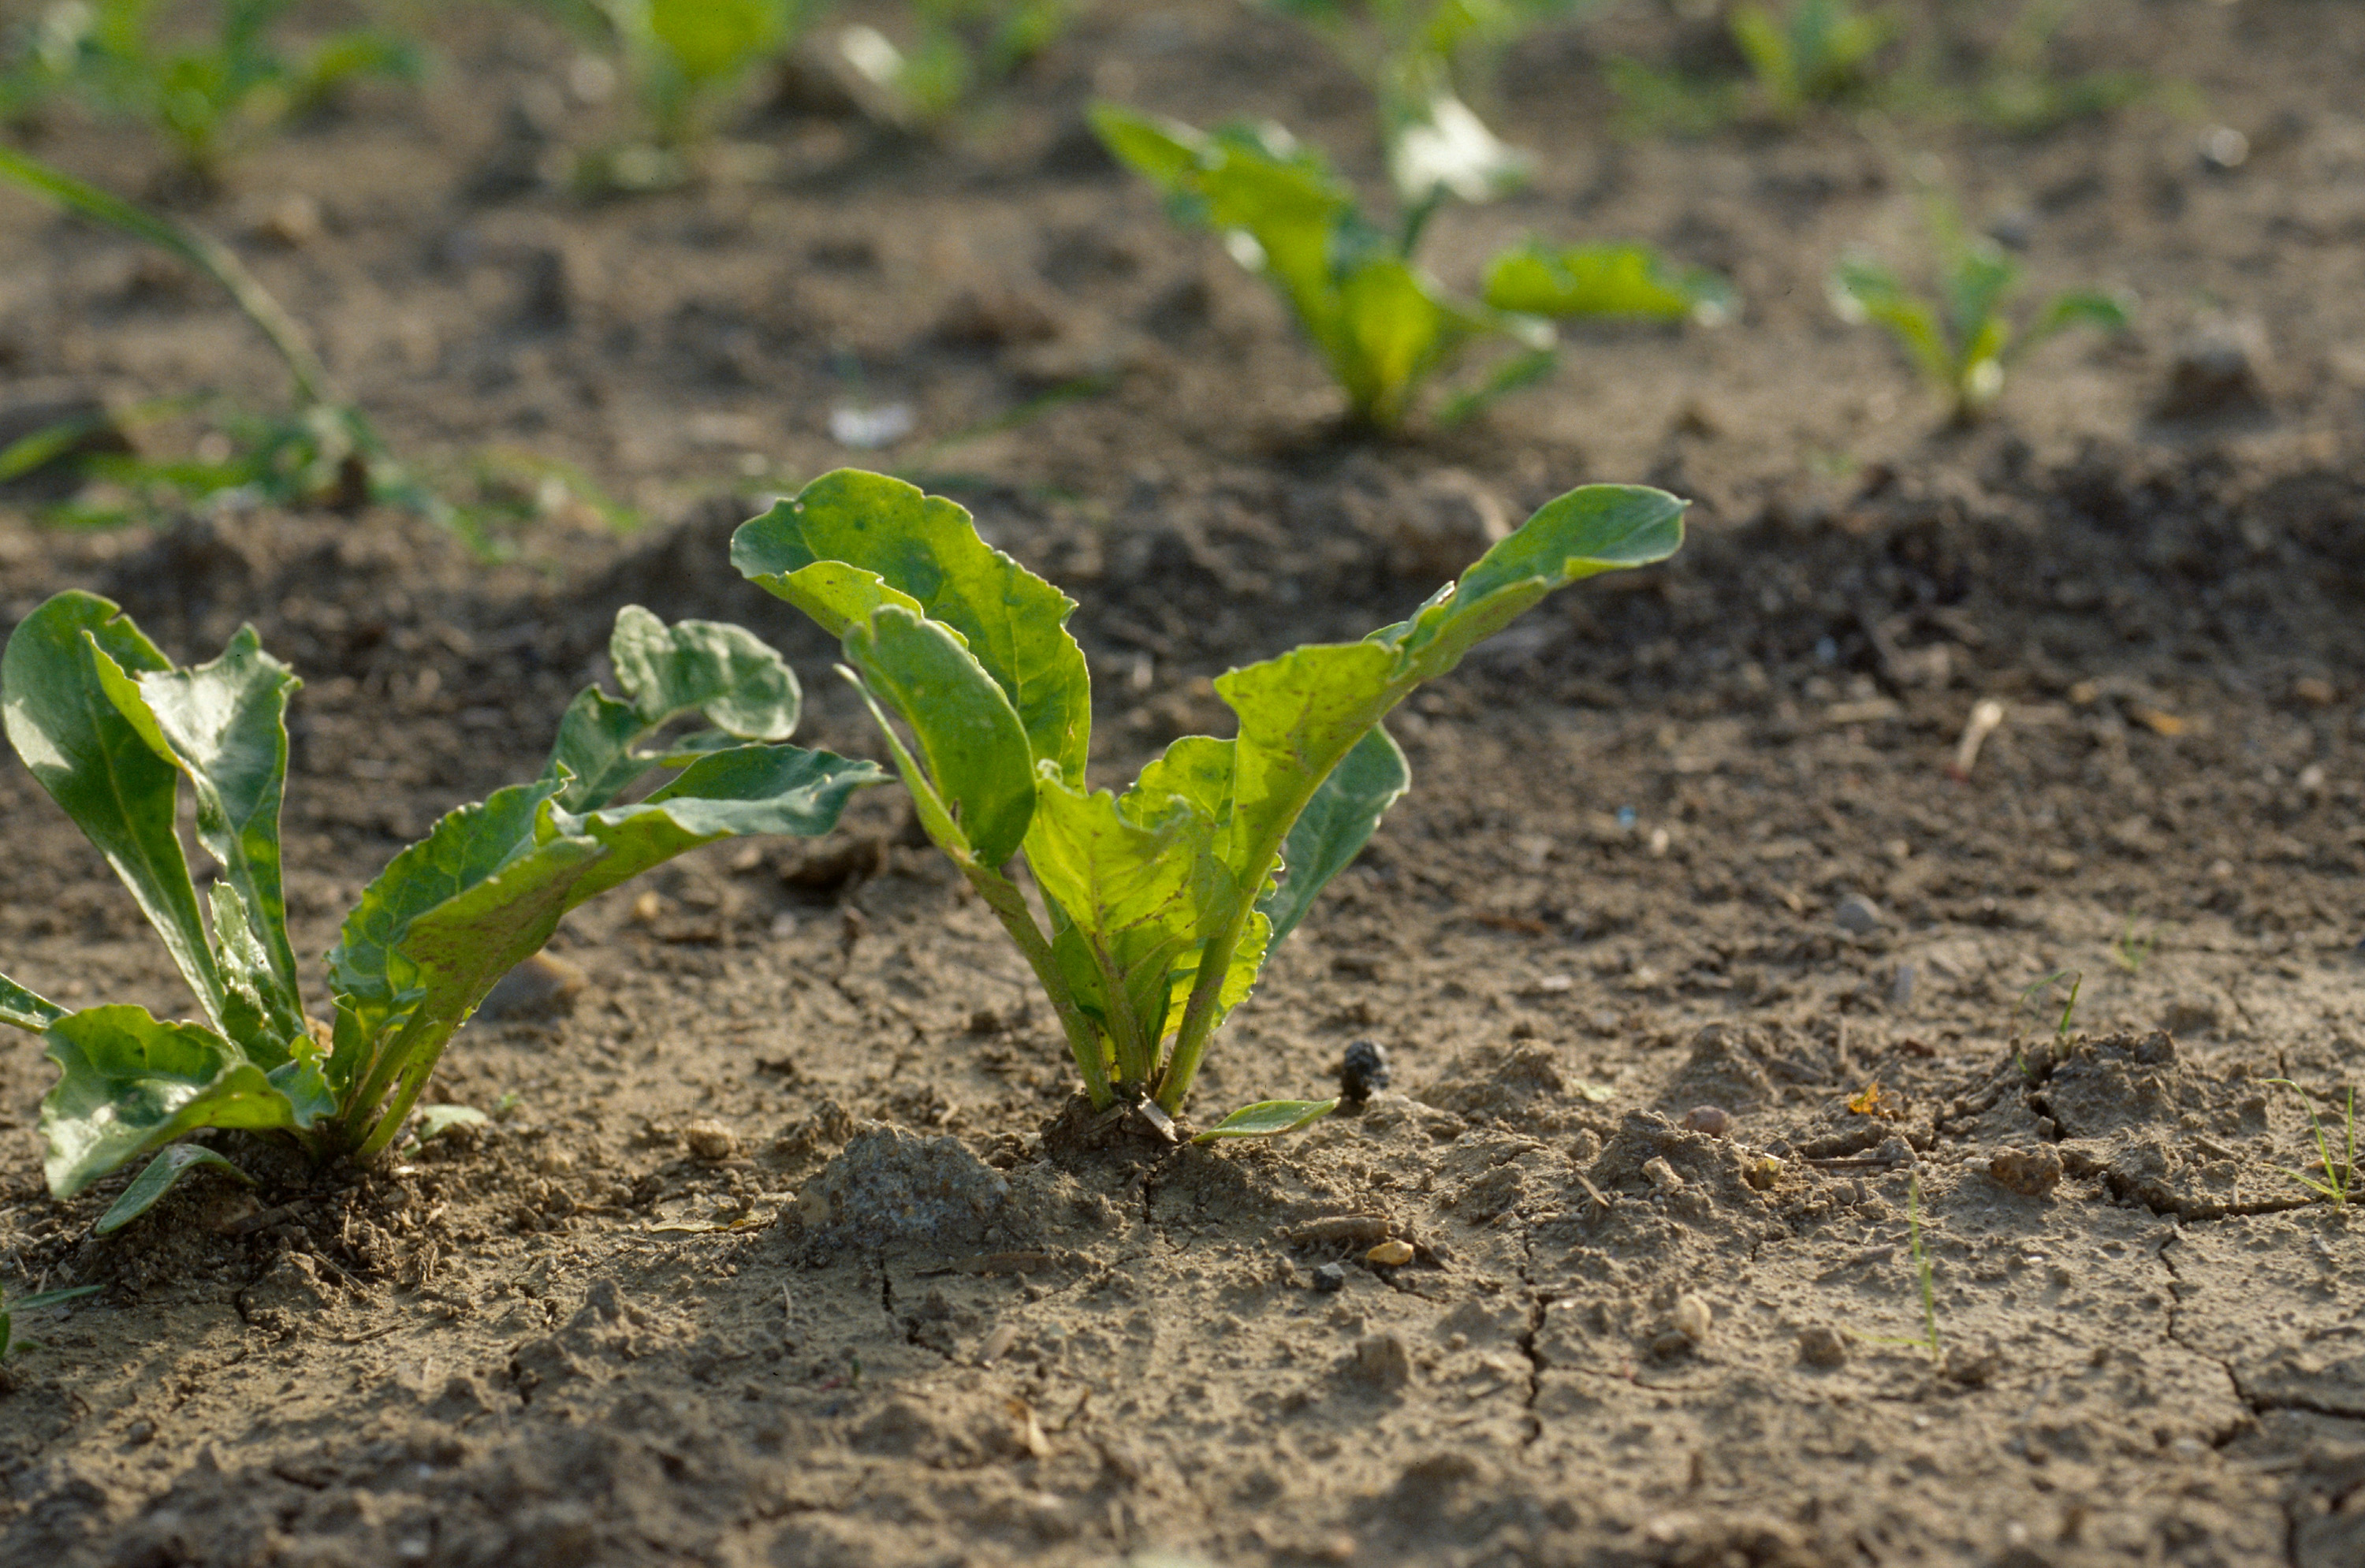 An agronomic image of a sugarbeet.